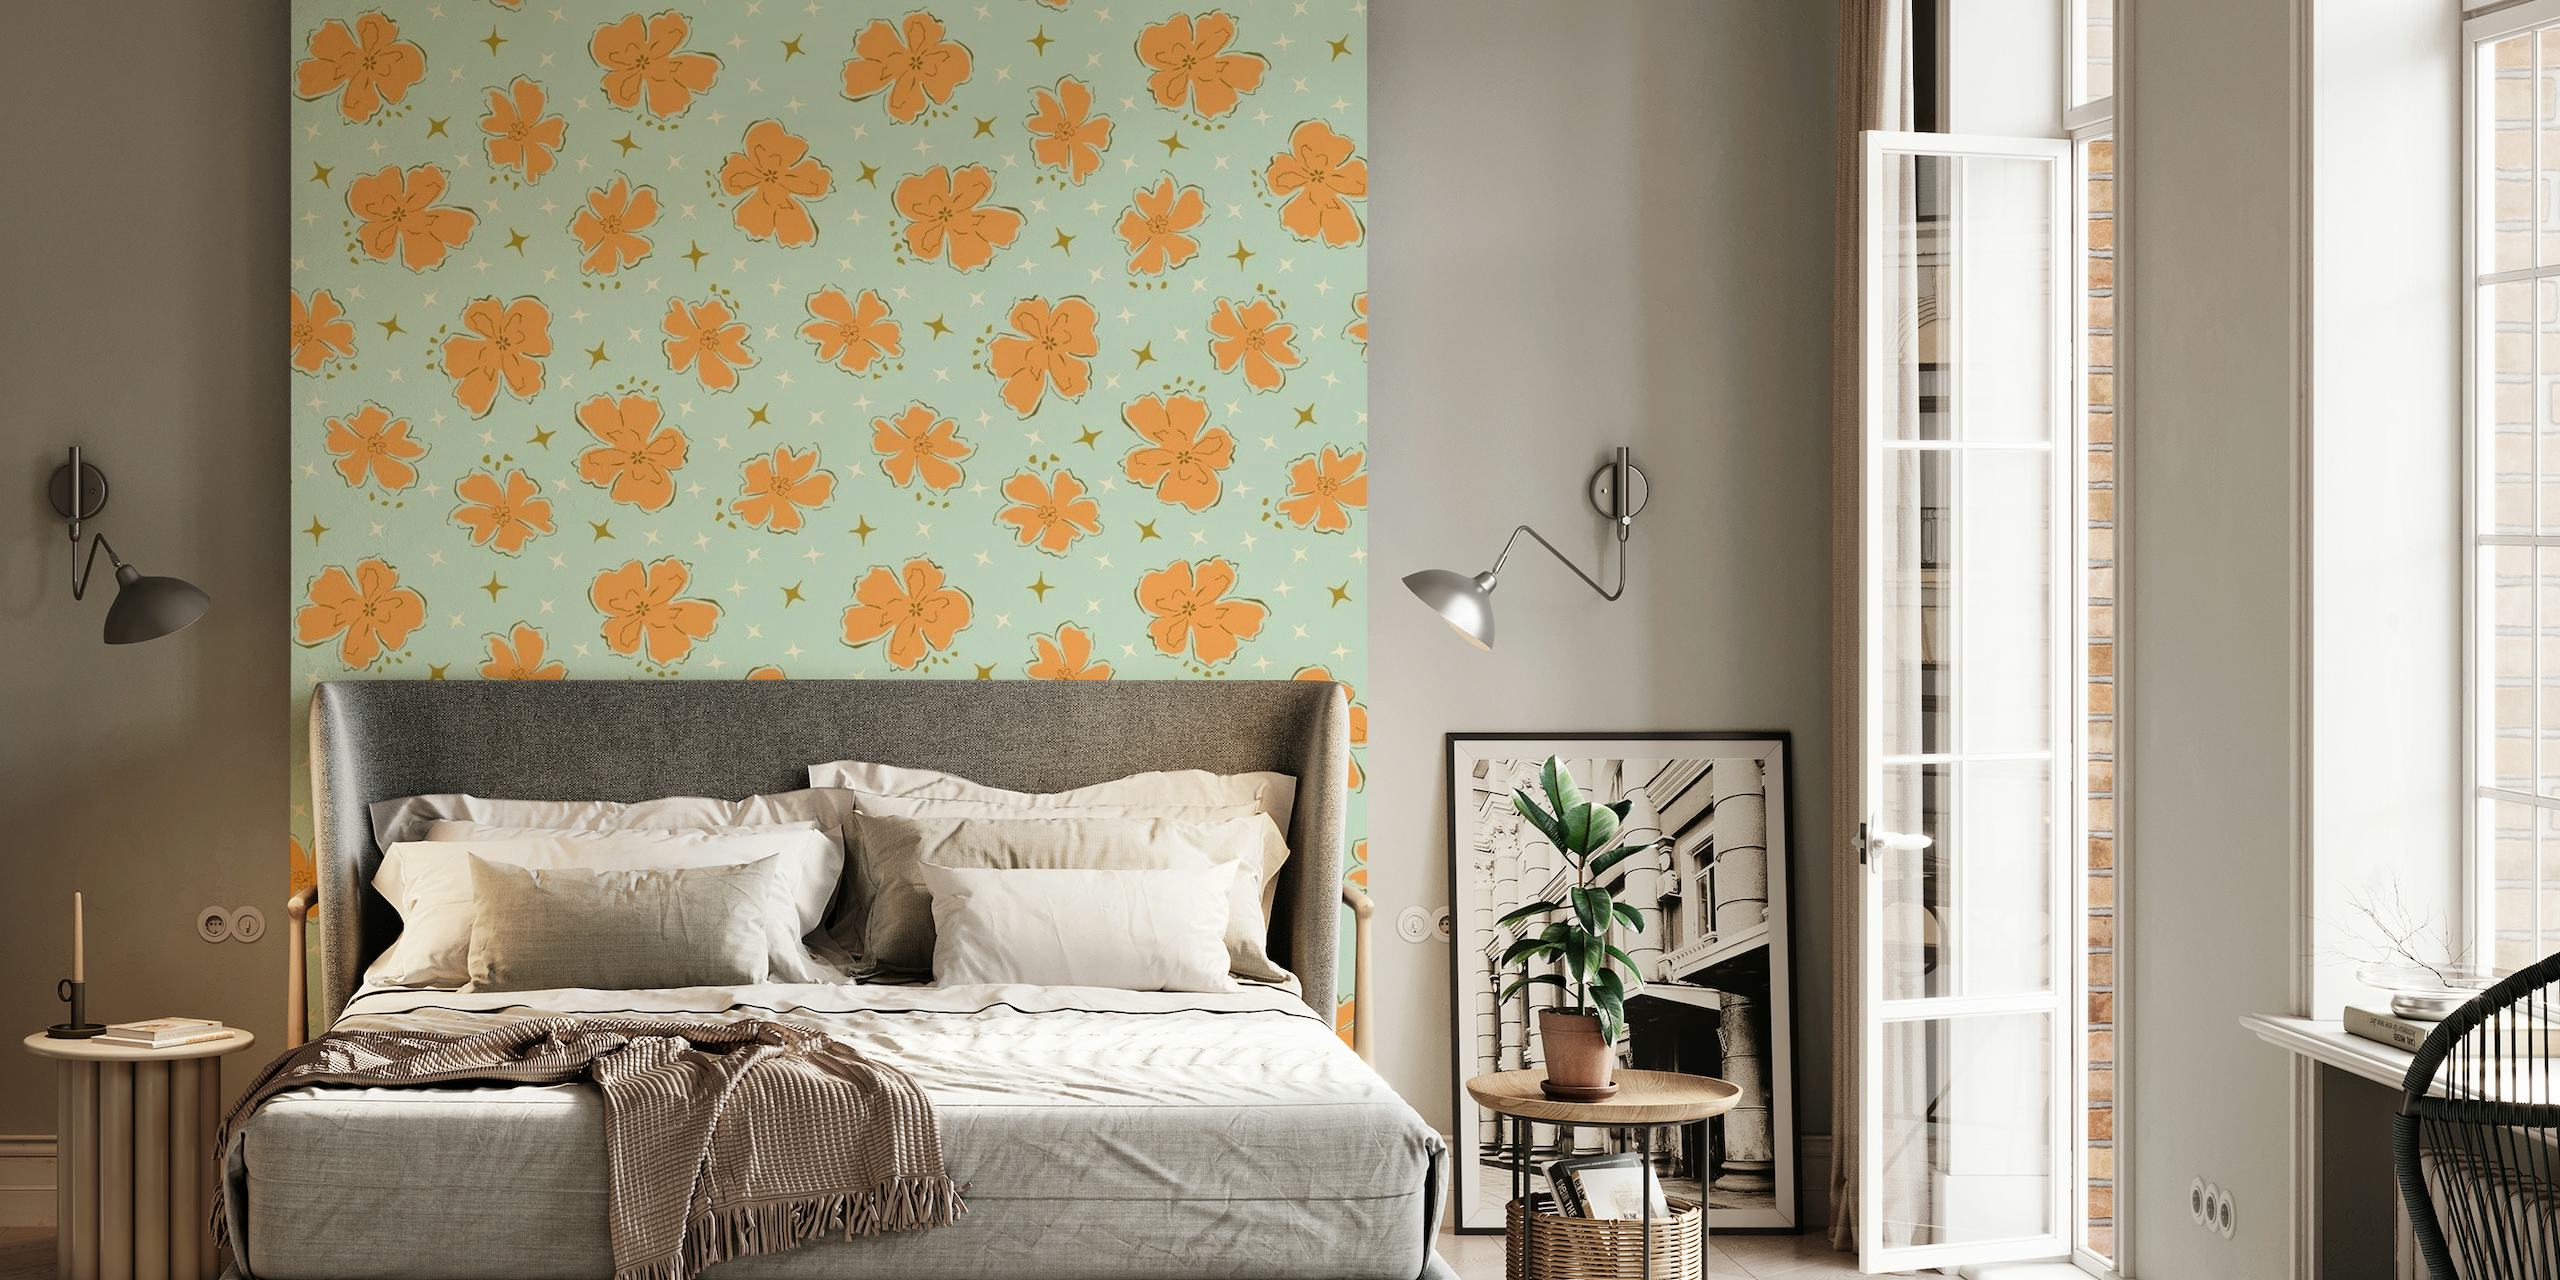 Orange flowers on a teal background wall mural design